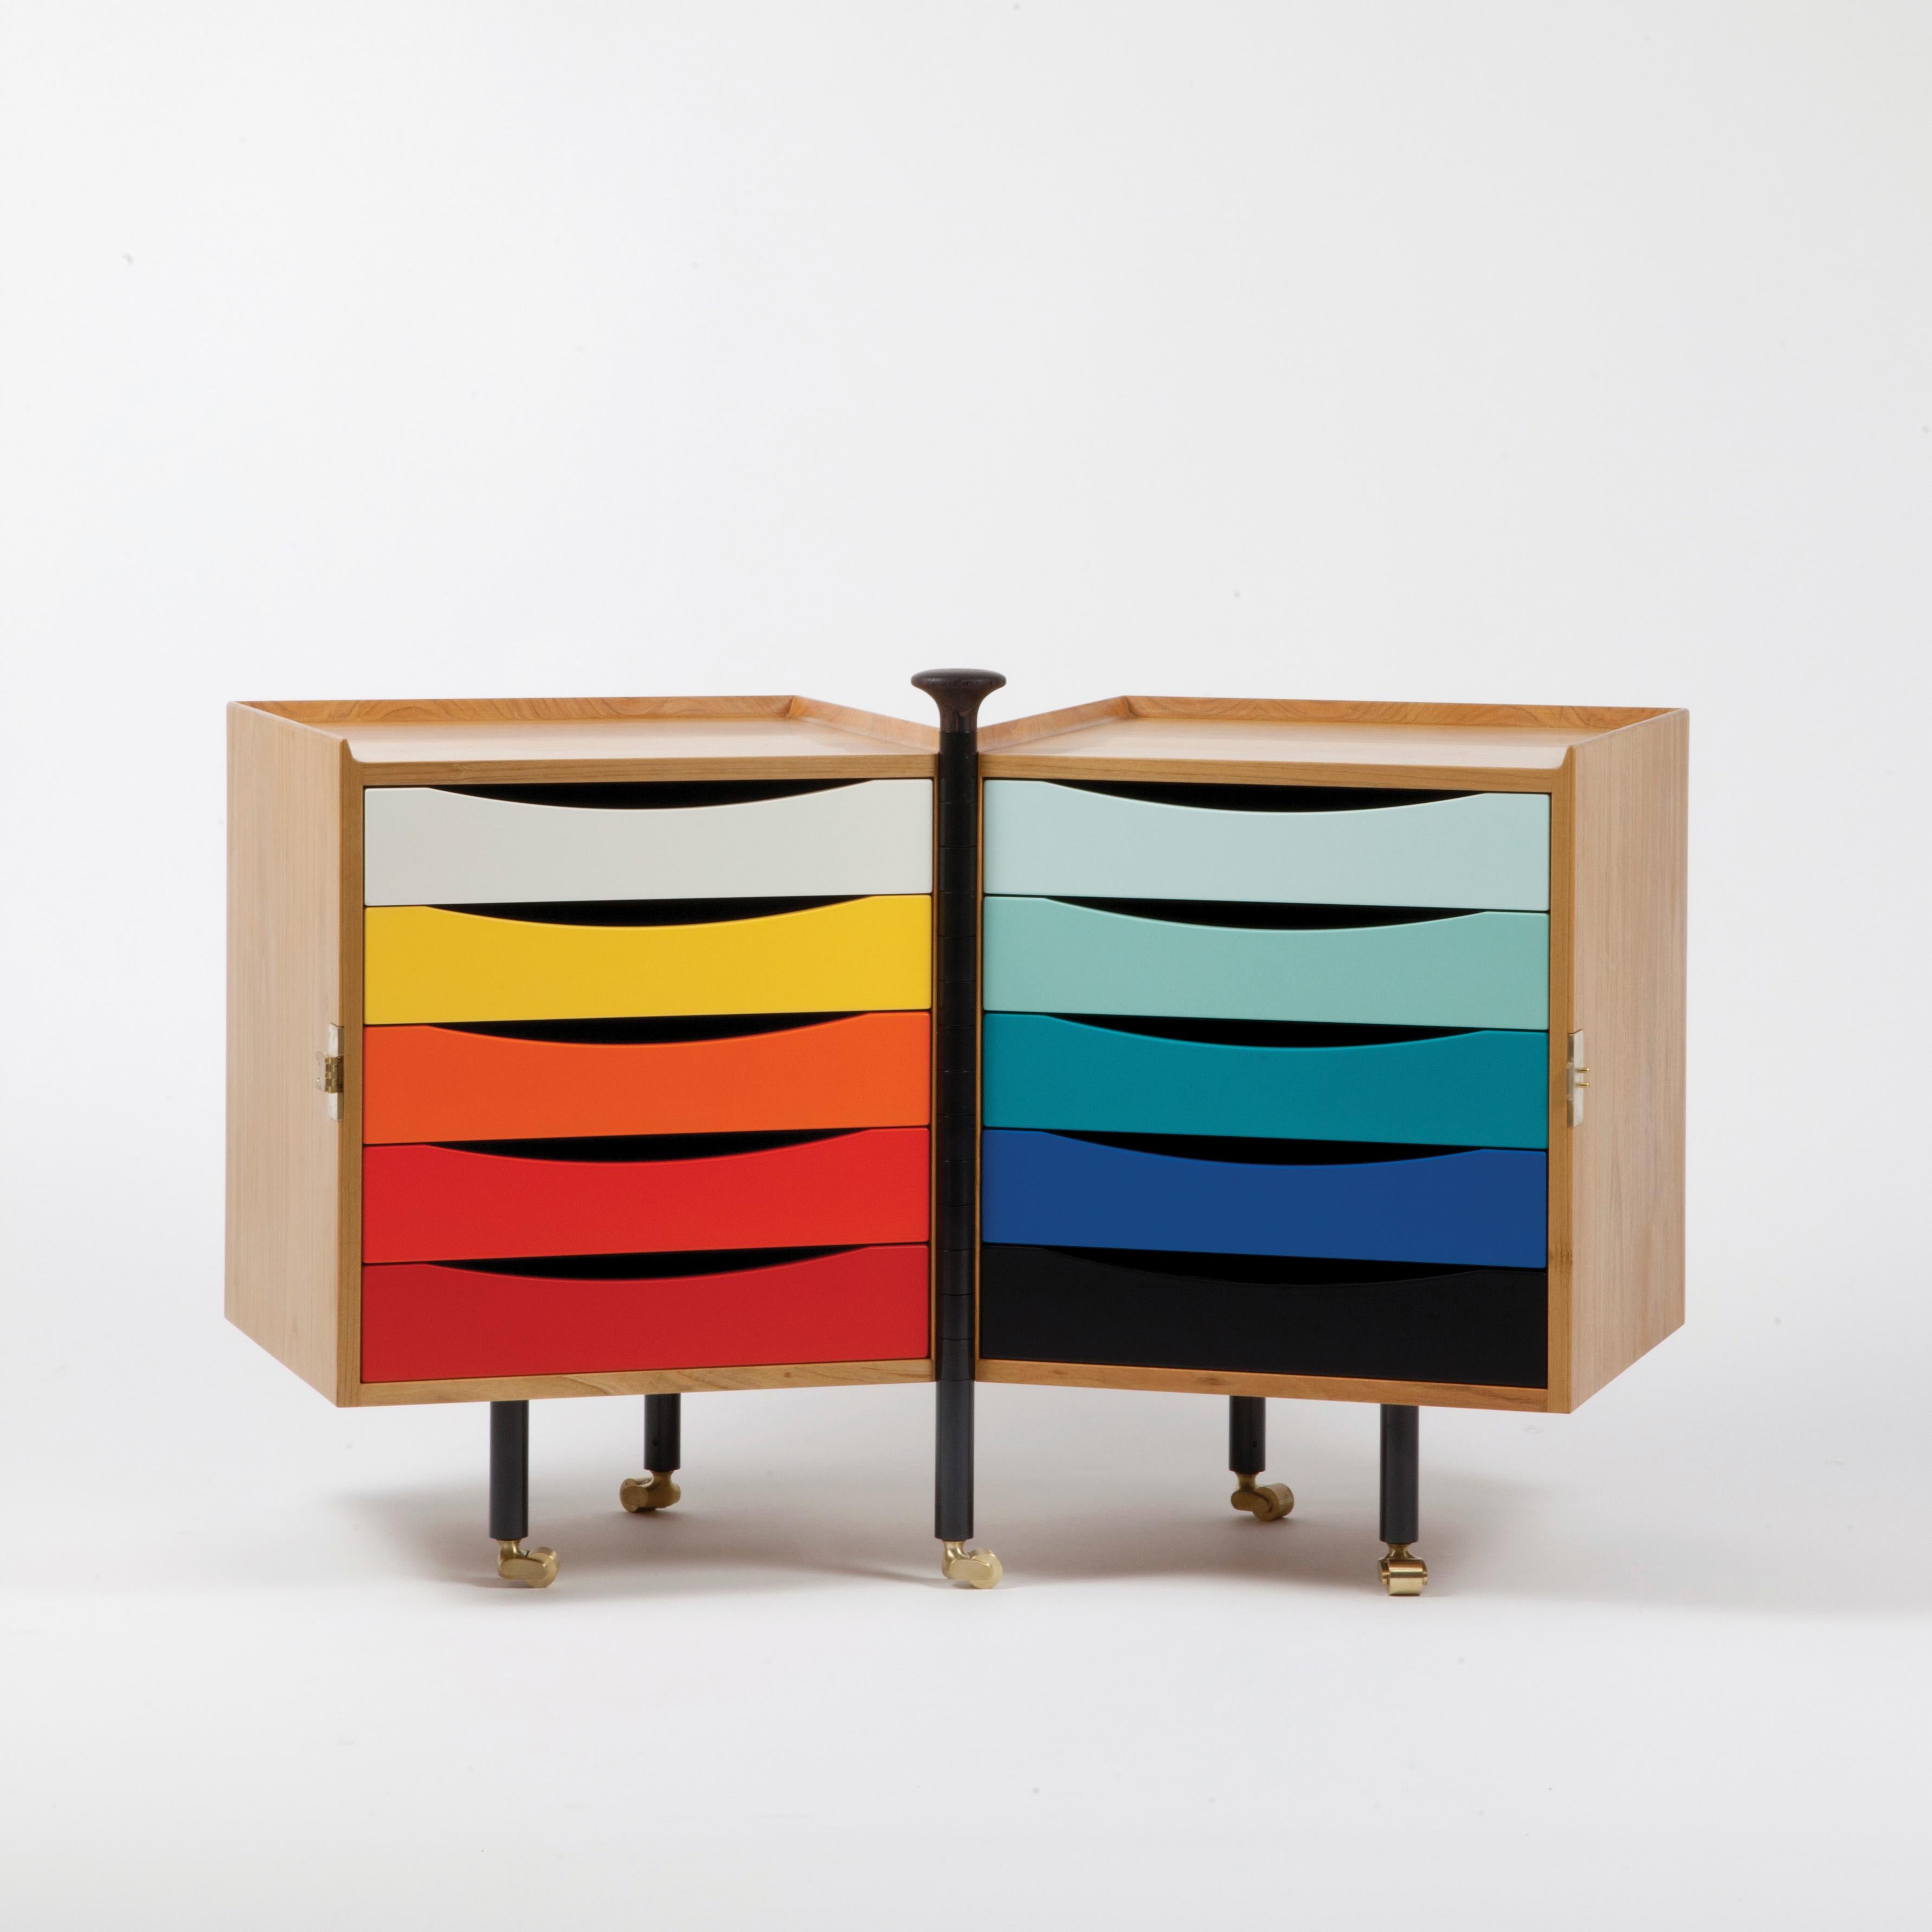 Scandinavian Modern Cabinet designed by Finn Juhl in 1961, relaunched in 2015.
Manufactured by House of Finn Juhl in Denmark.

The Glove Cabinet, designed by Finn Juhl for his wife Hanne Wilhelm Hansen, was presented by Ludwig Pontoppidan at the